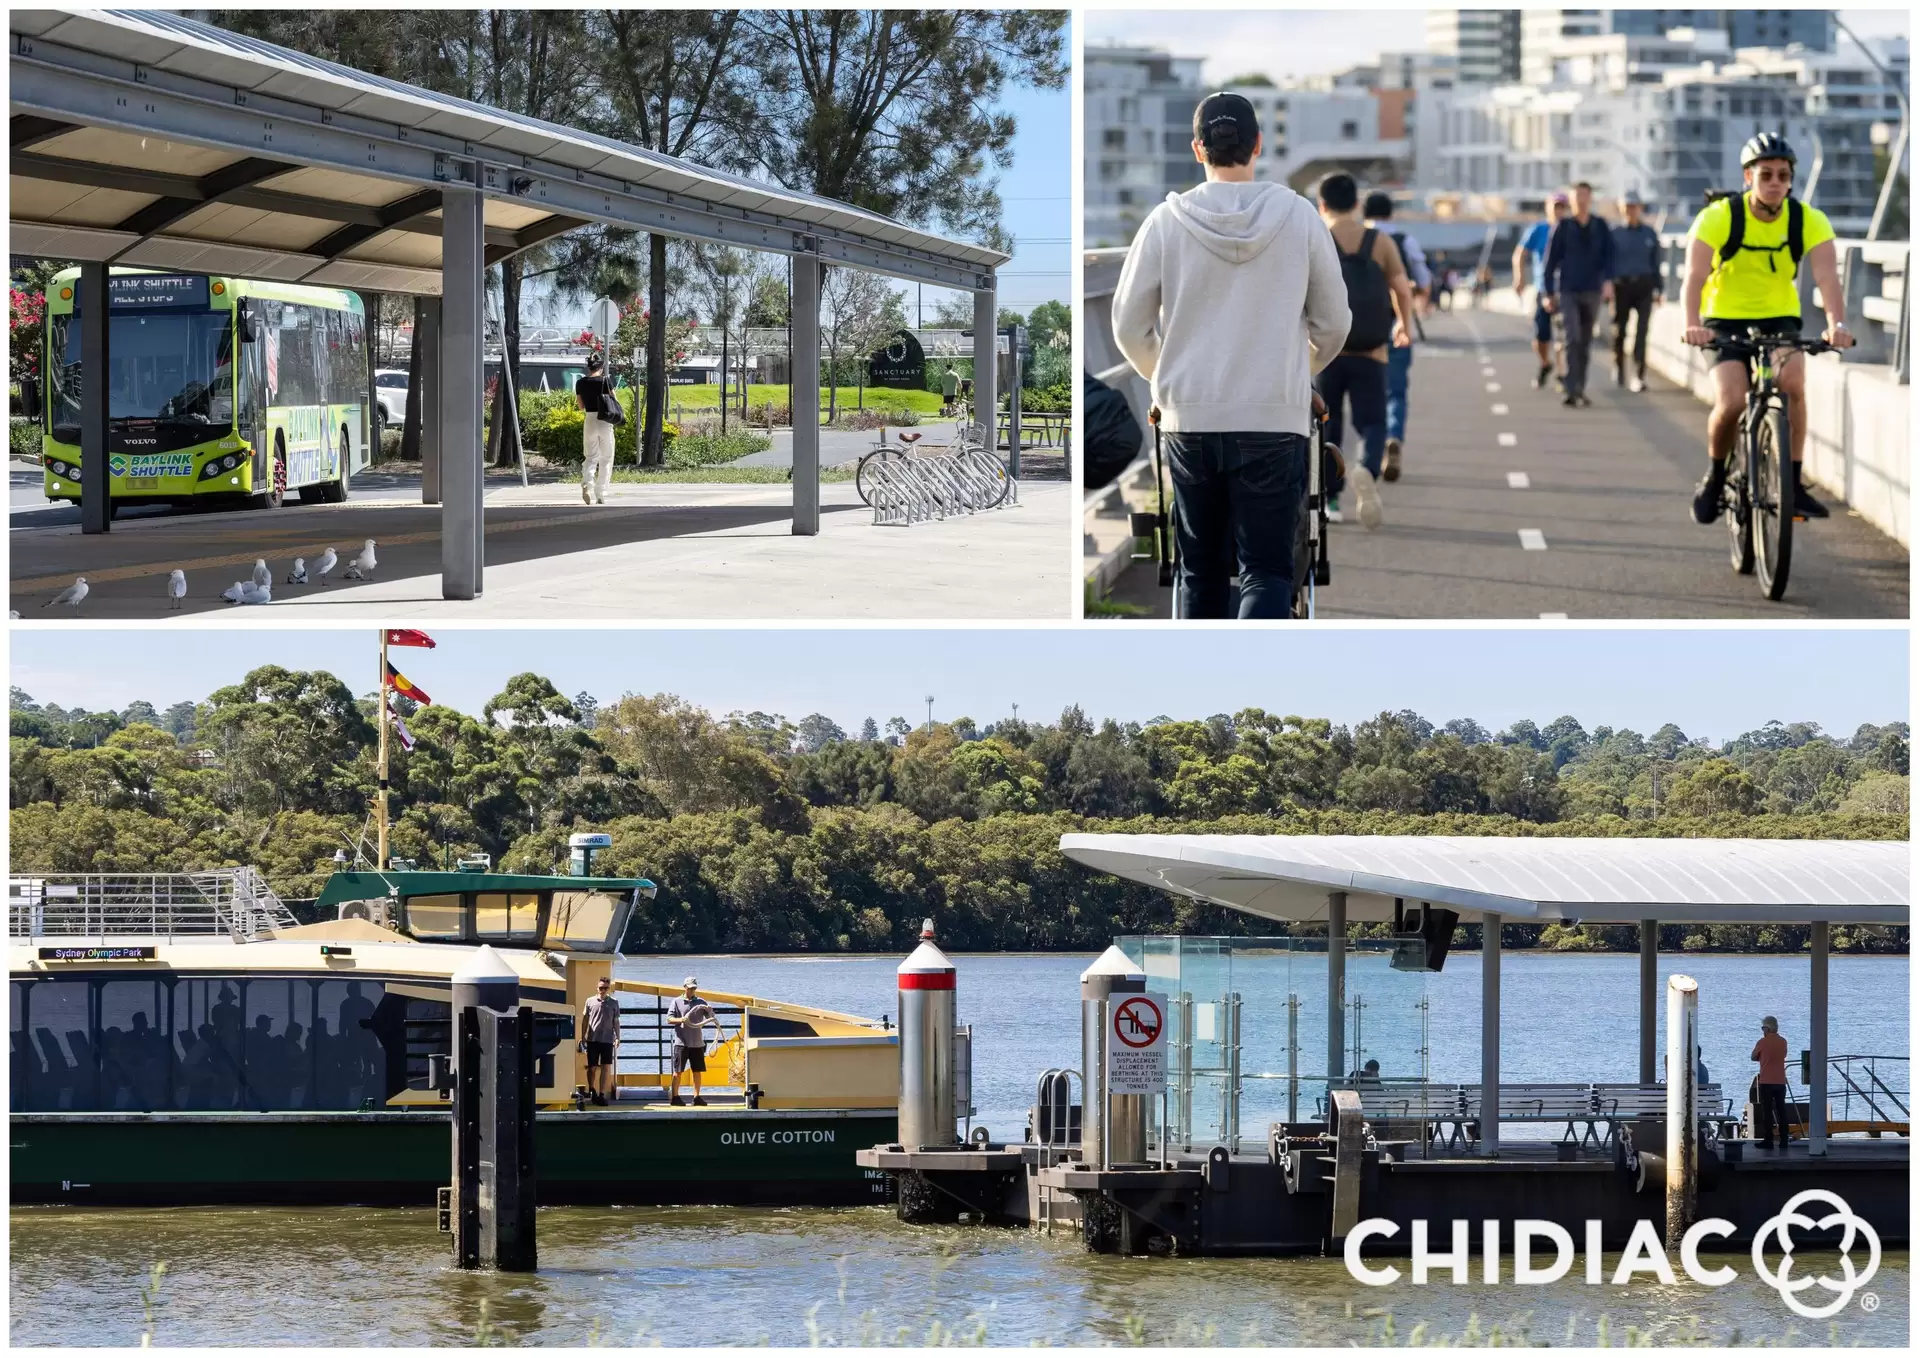 806/4 Footbridge Boulevard, Wentworth Point Leased by Chidiac Realty - image 1